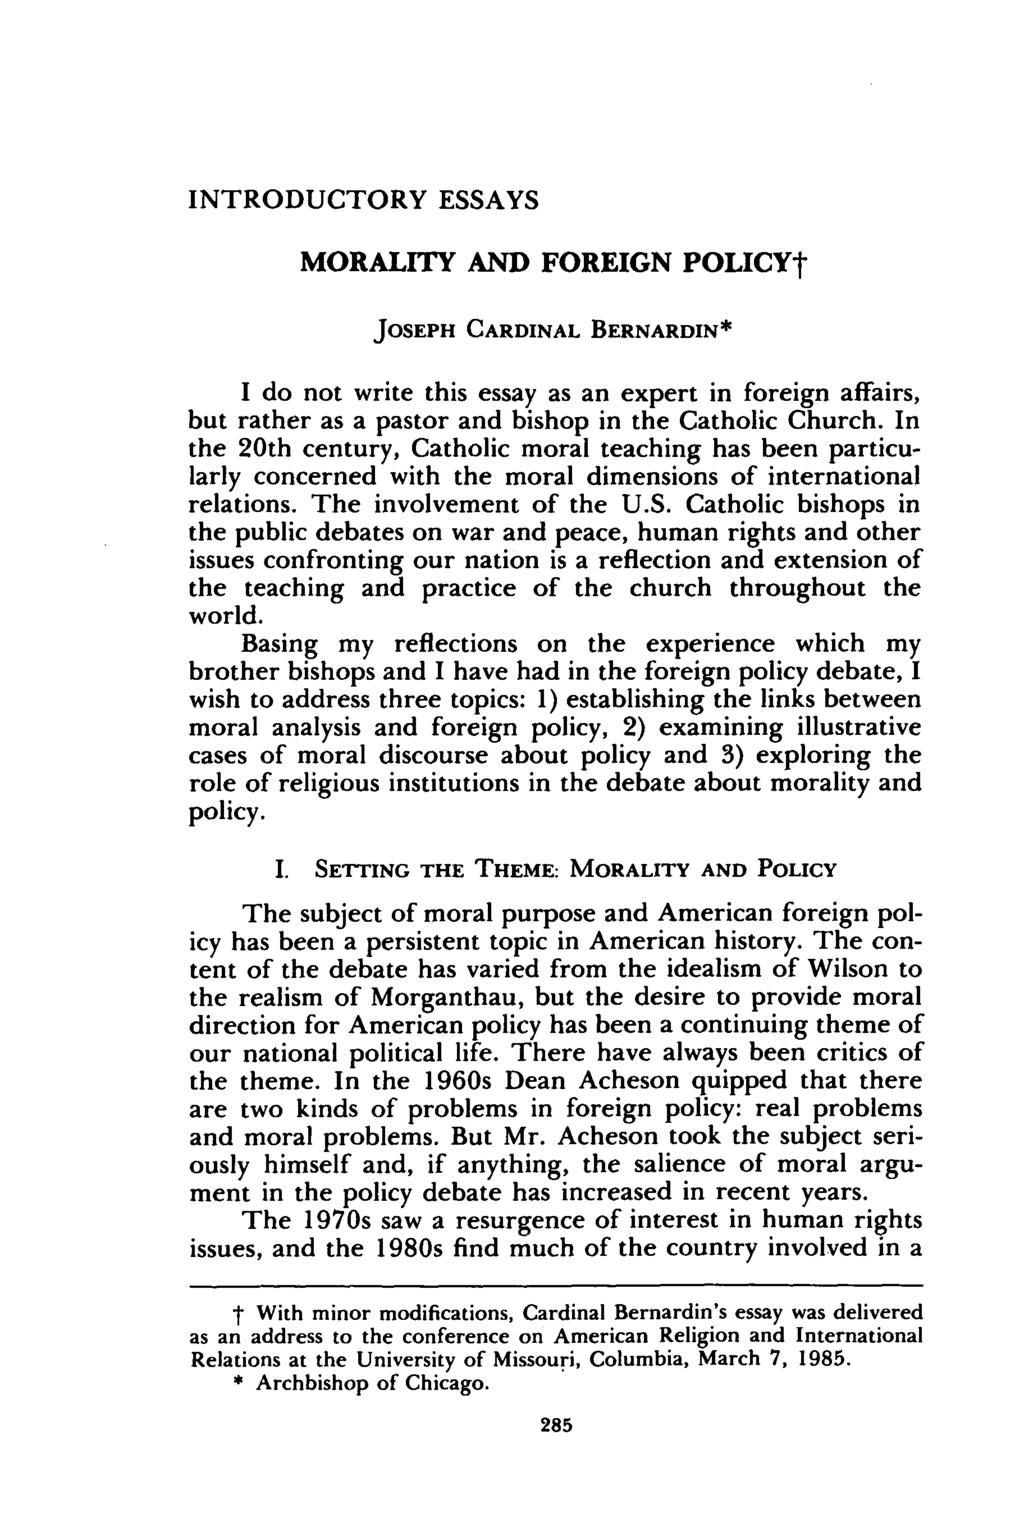 INTRODUCTORY ESSAYS MORALITY AND FOREIGN POLICY- JOSEPH CARDINAL BERNARDIN* I do not write this essay as an expert in foreign affairs, but rather as a pastor and bishop in the Catholic Church.